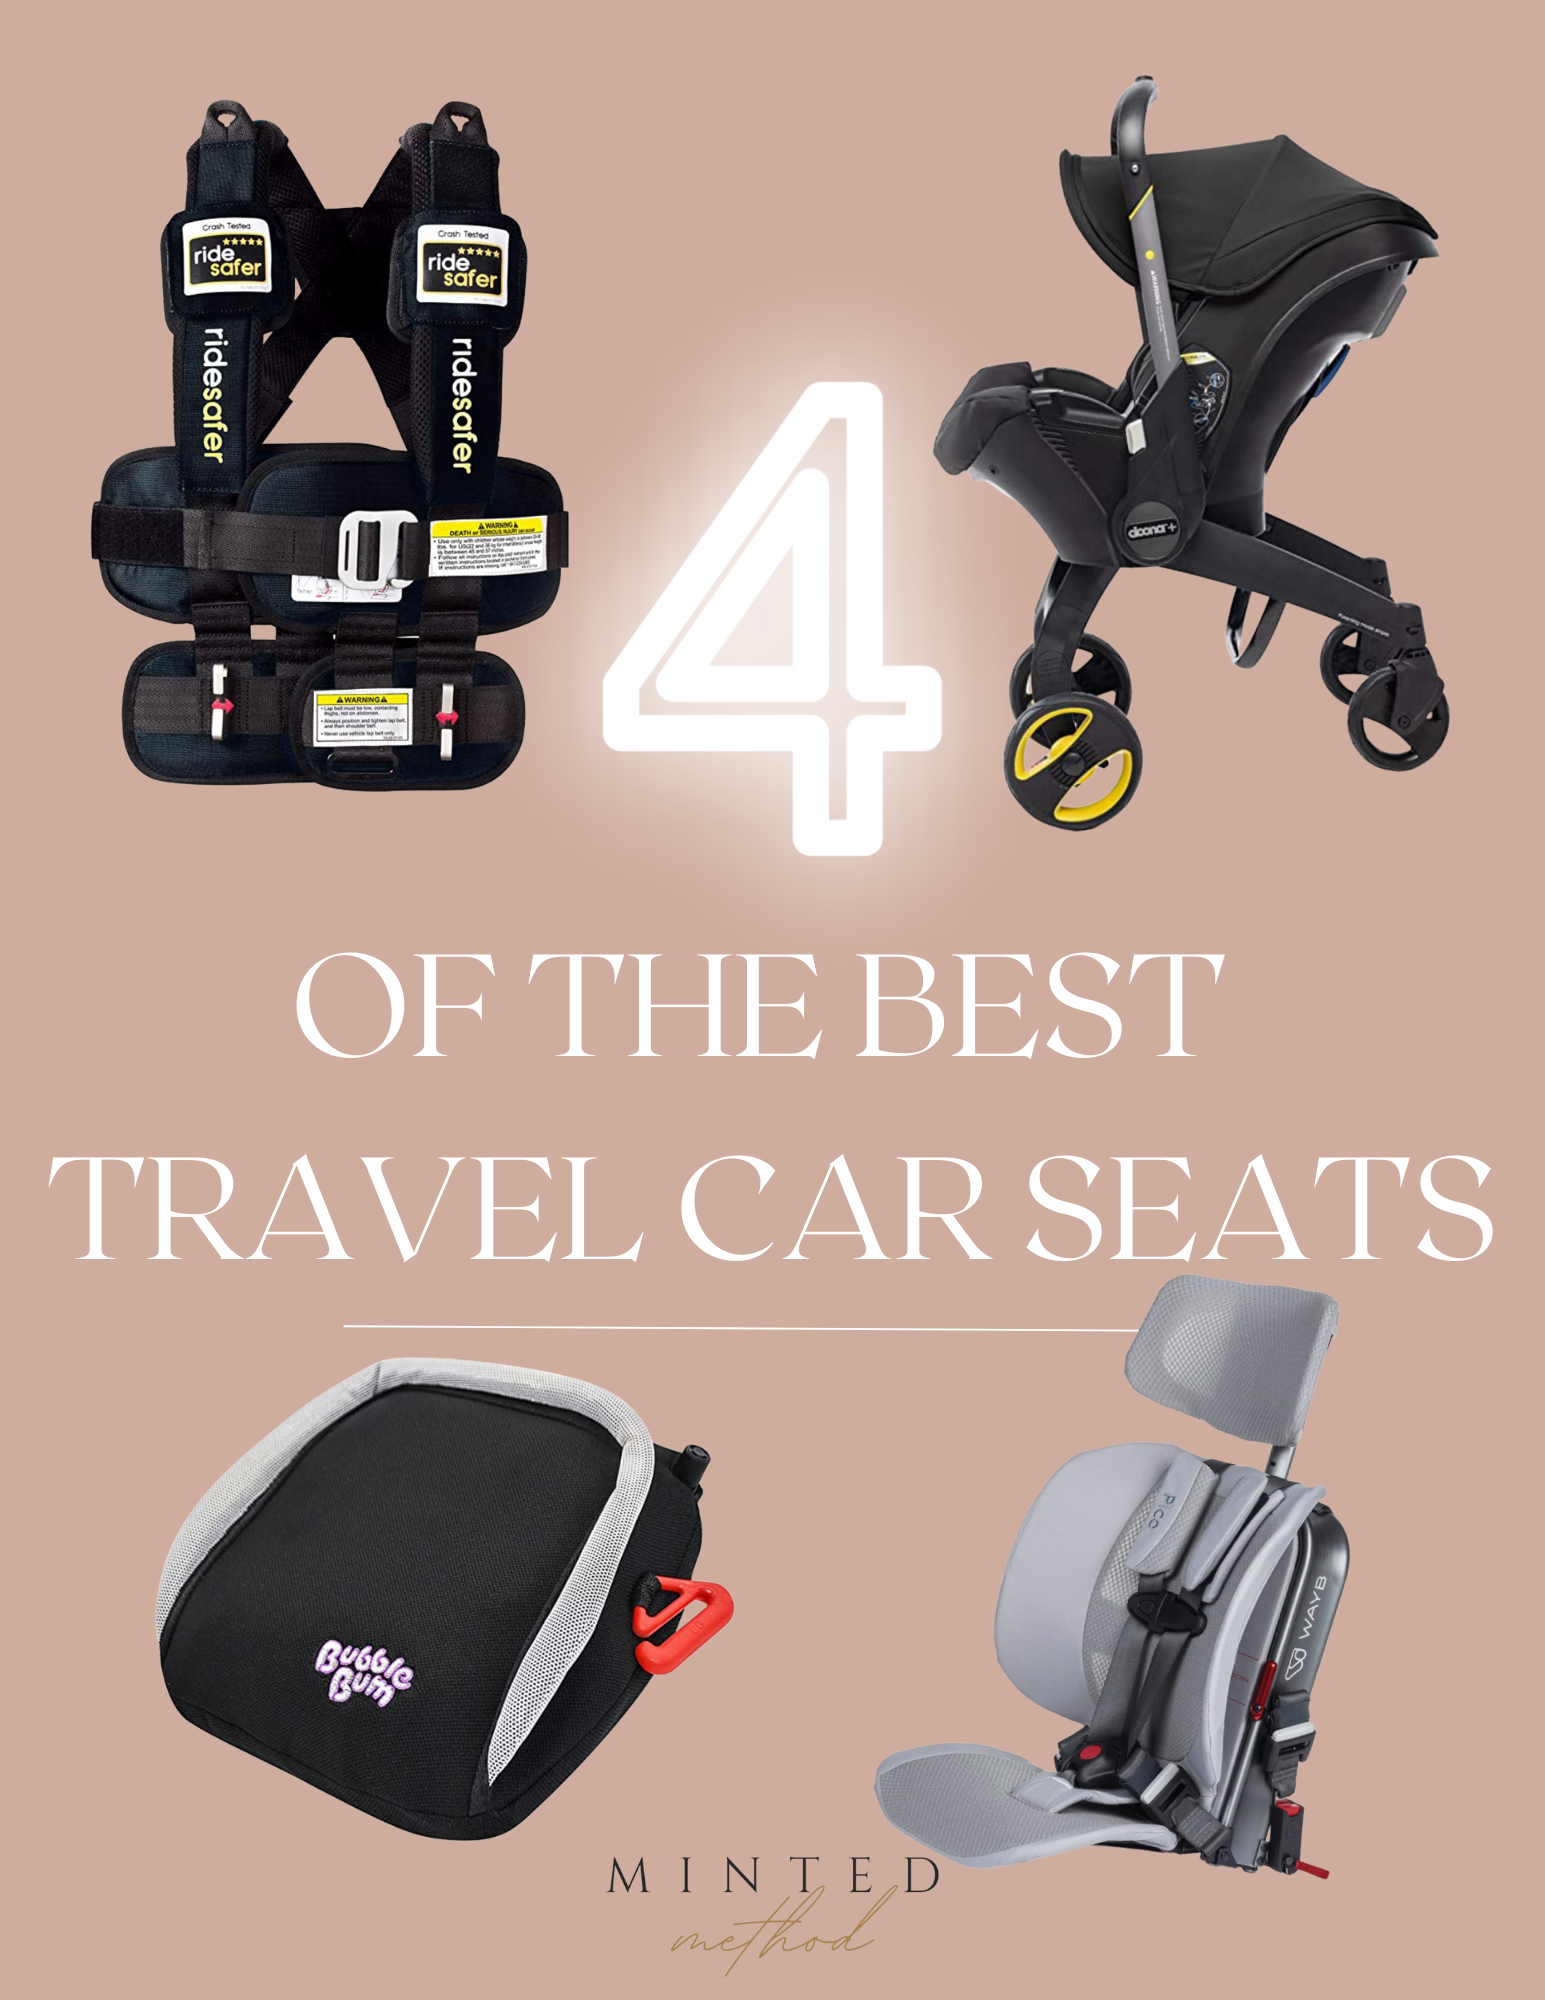 4 Of the Best Travel Car Seats